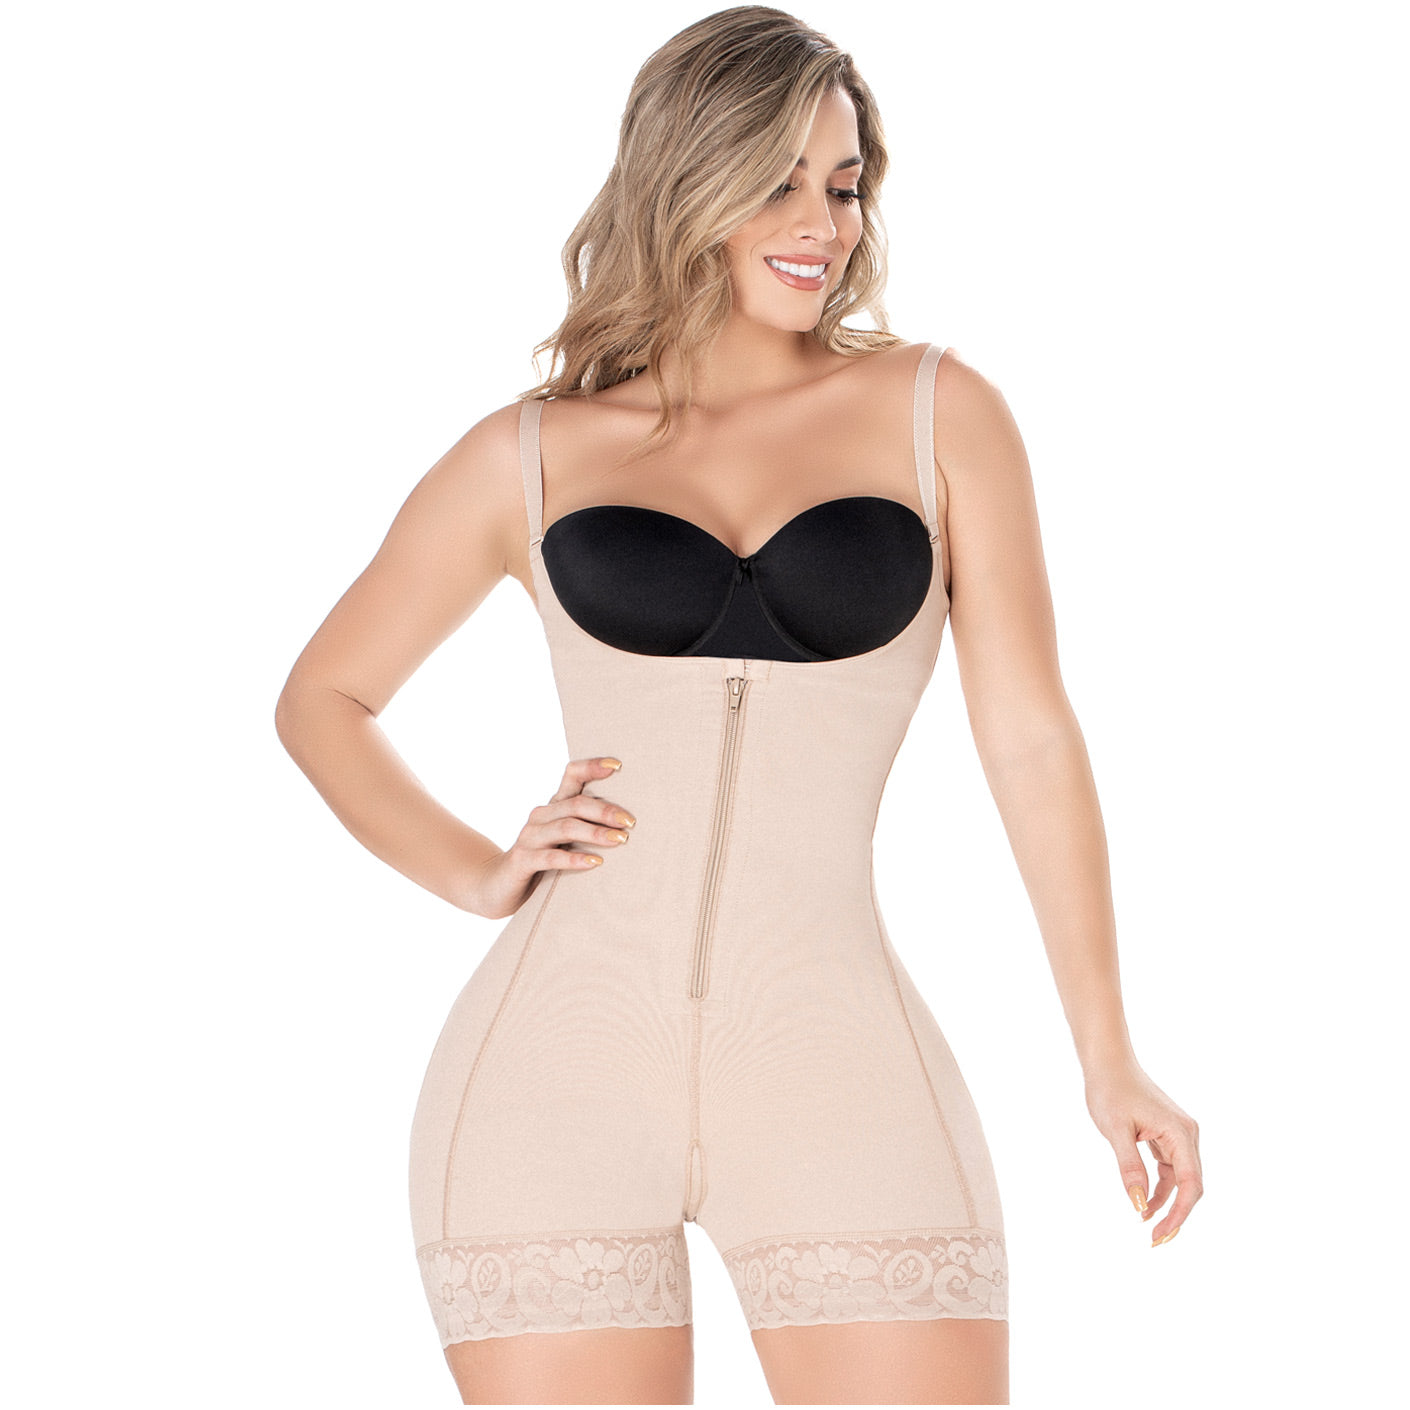 Tummy Tuck Post-Surgery and Daily Use Shapewear with Flat Zipper